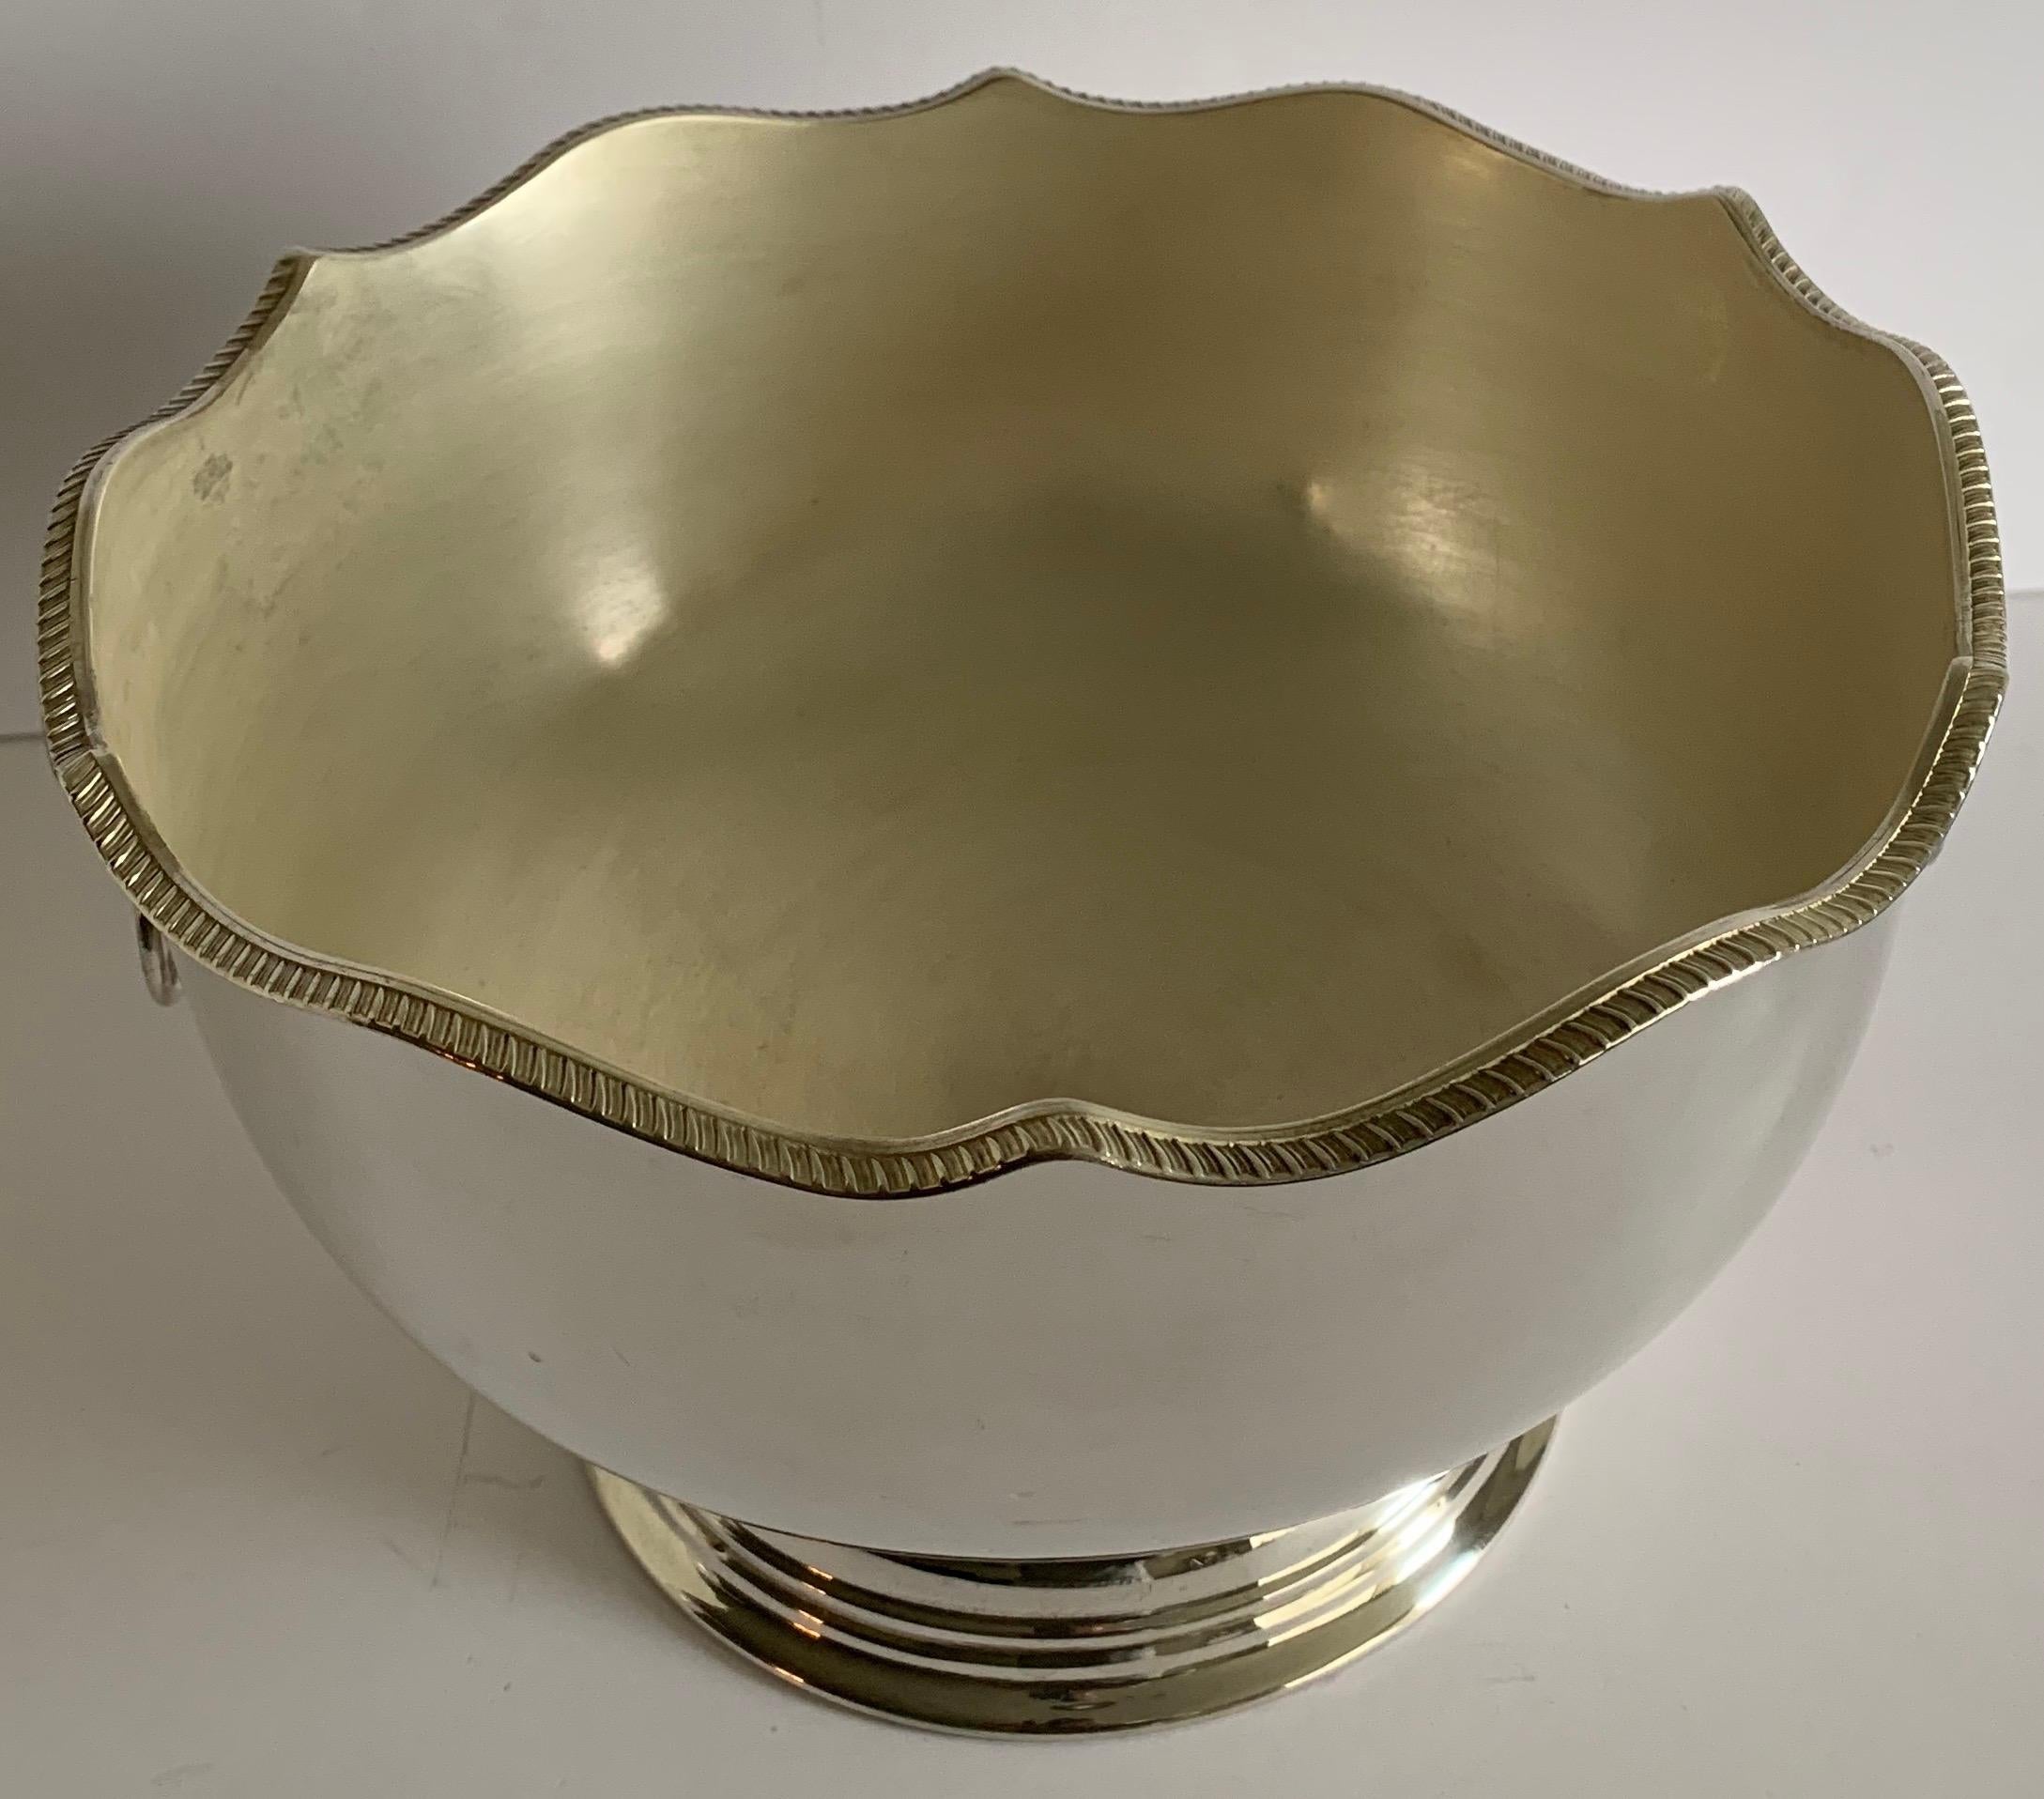 Large English silver plated monteith or punch bowl. Lion head detailing. Newly re-plated and polished to a high shine. No makers mark or hallmarks.